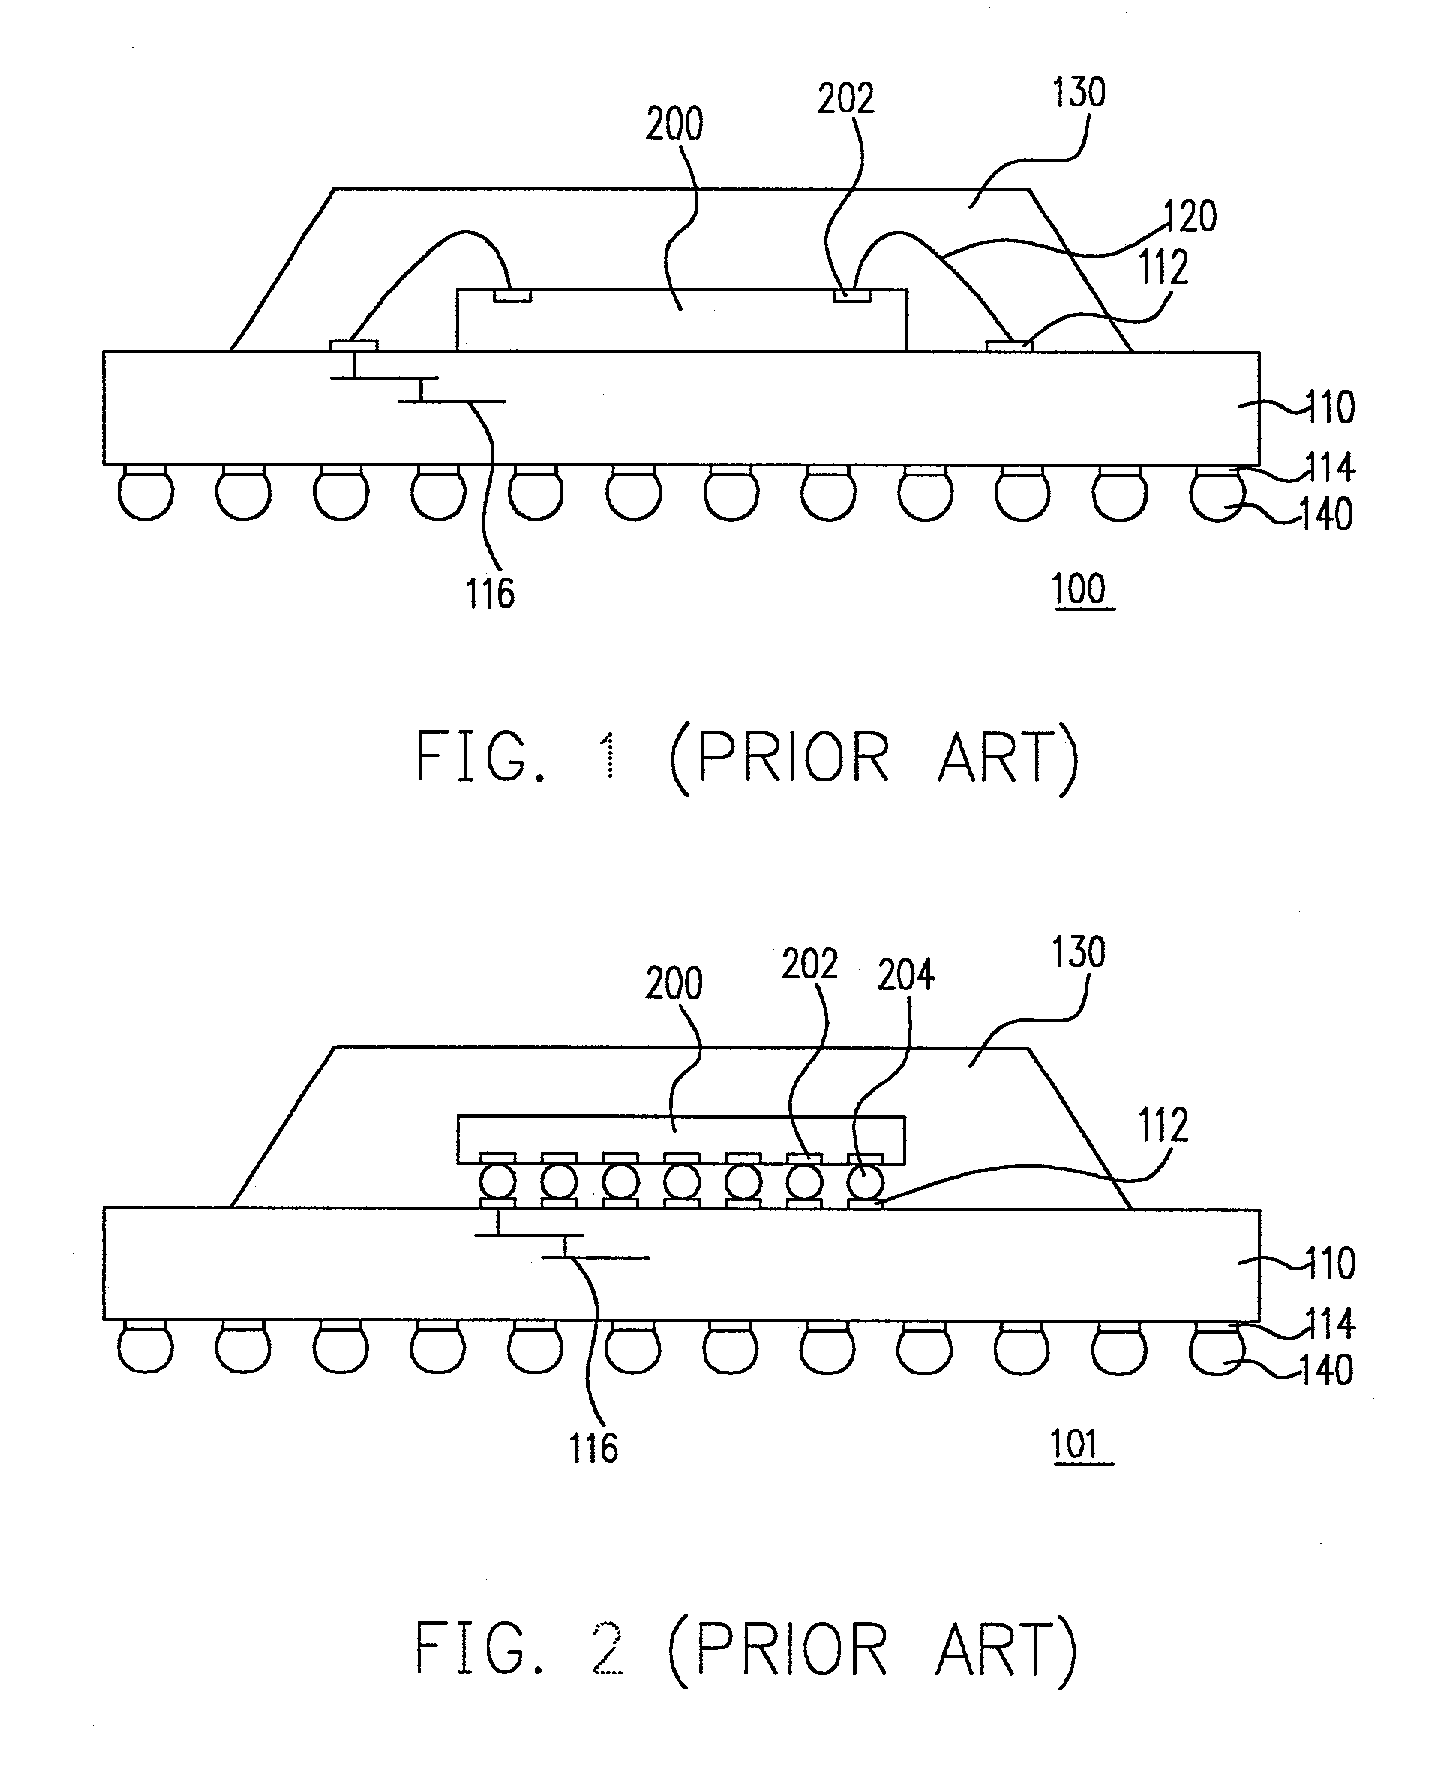 Integrated circuit package and method of manufacture